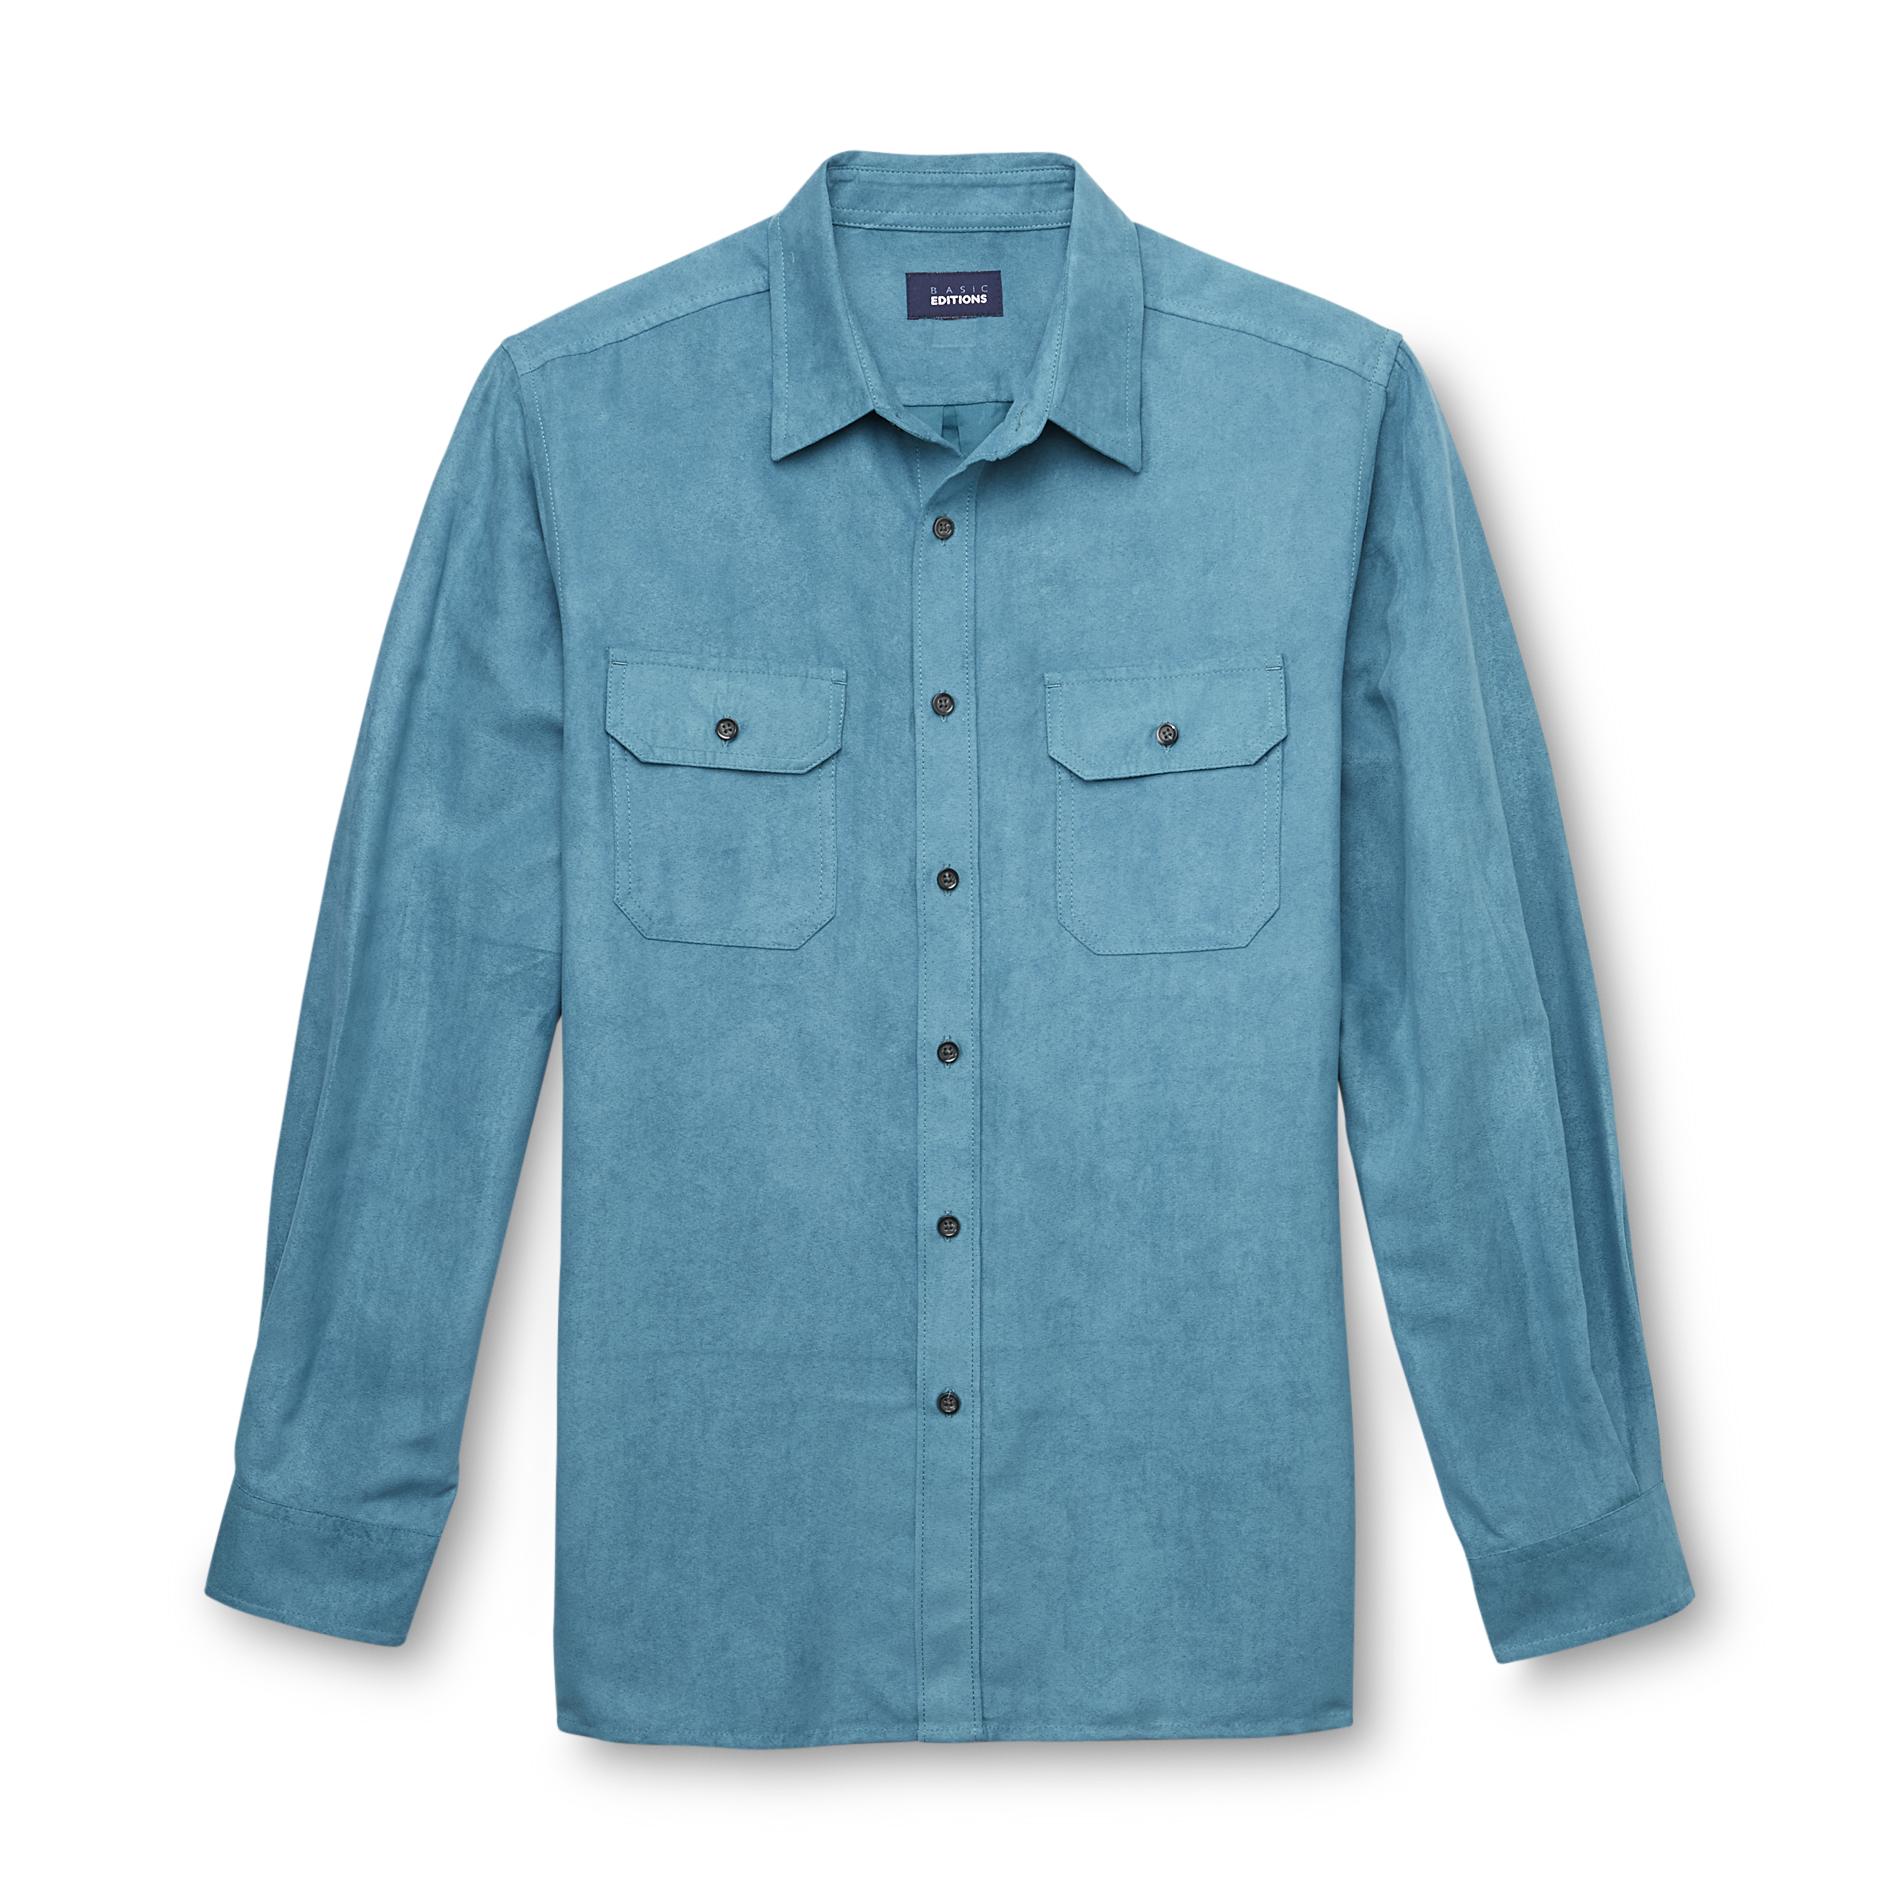 Basic Editions Men's Microsuede Button-Front Shirt